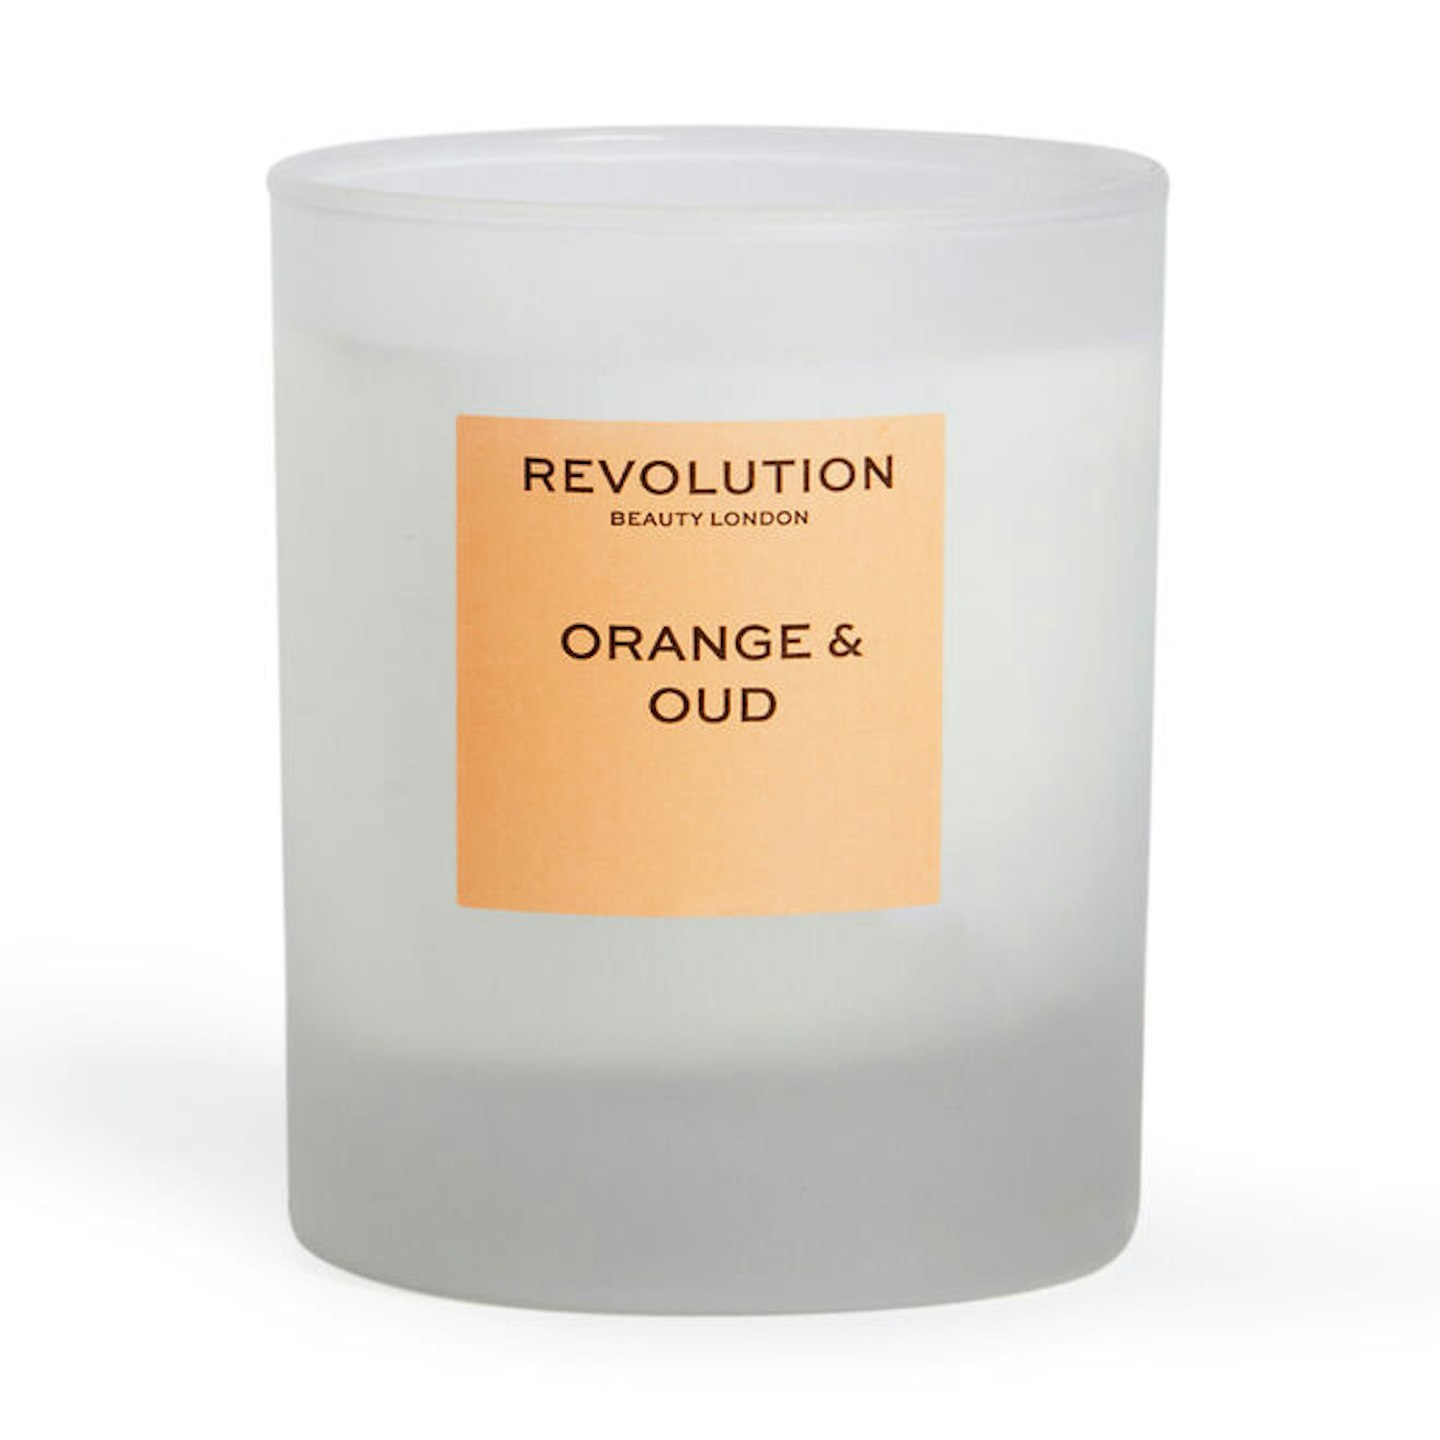 Makeup Revolution, Orange and Oud Candle, £5.60